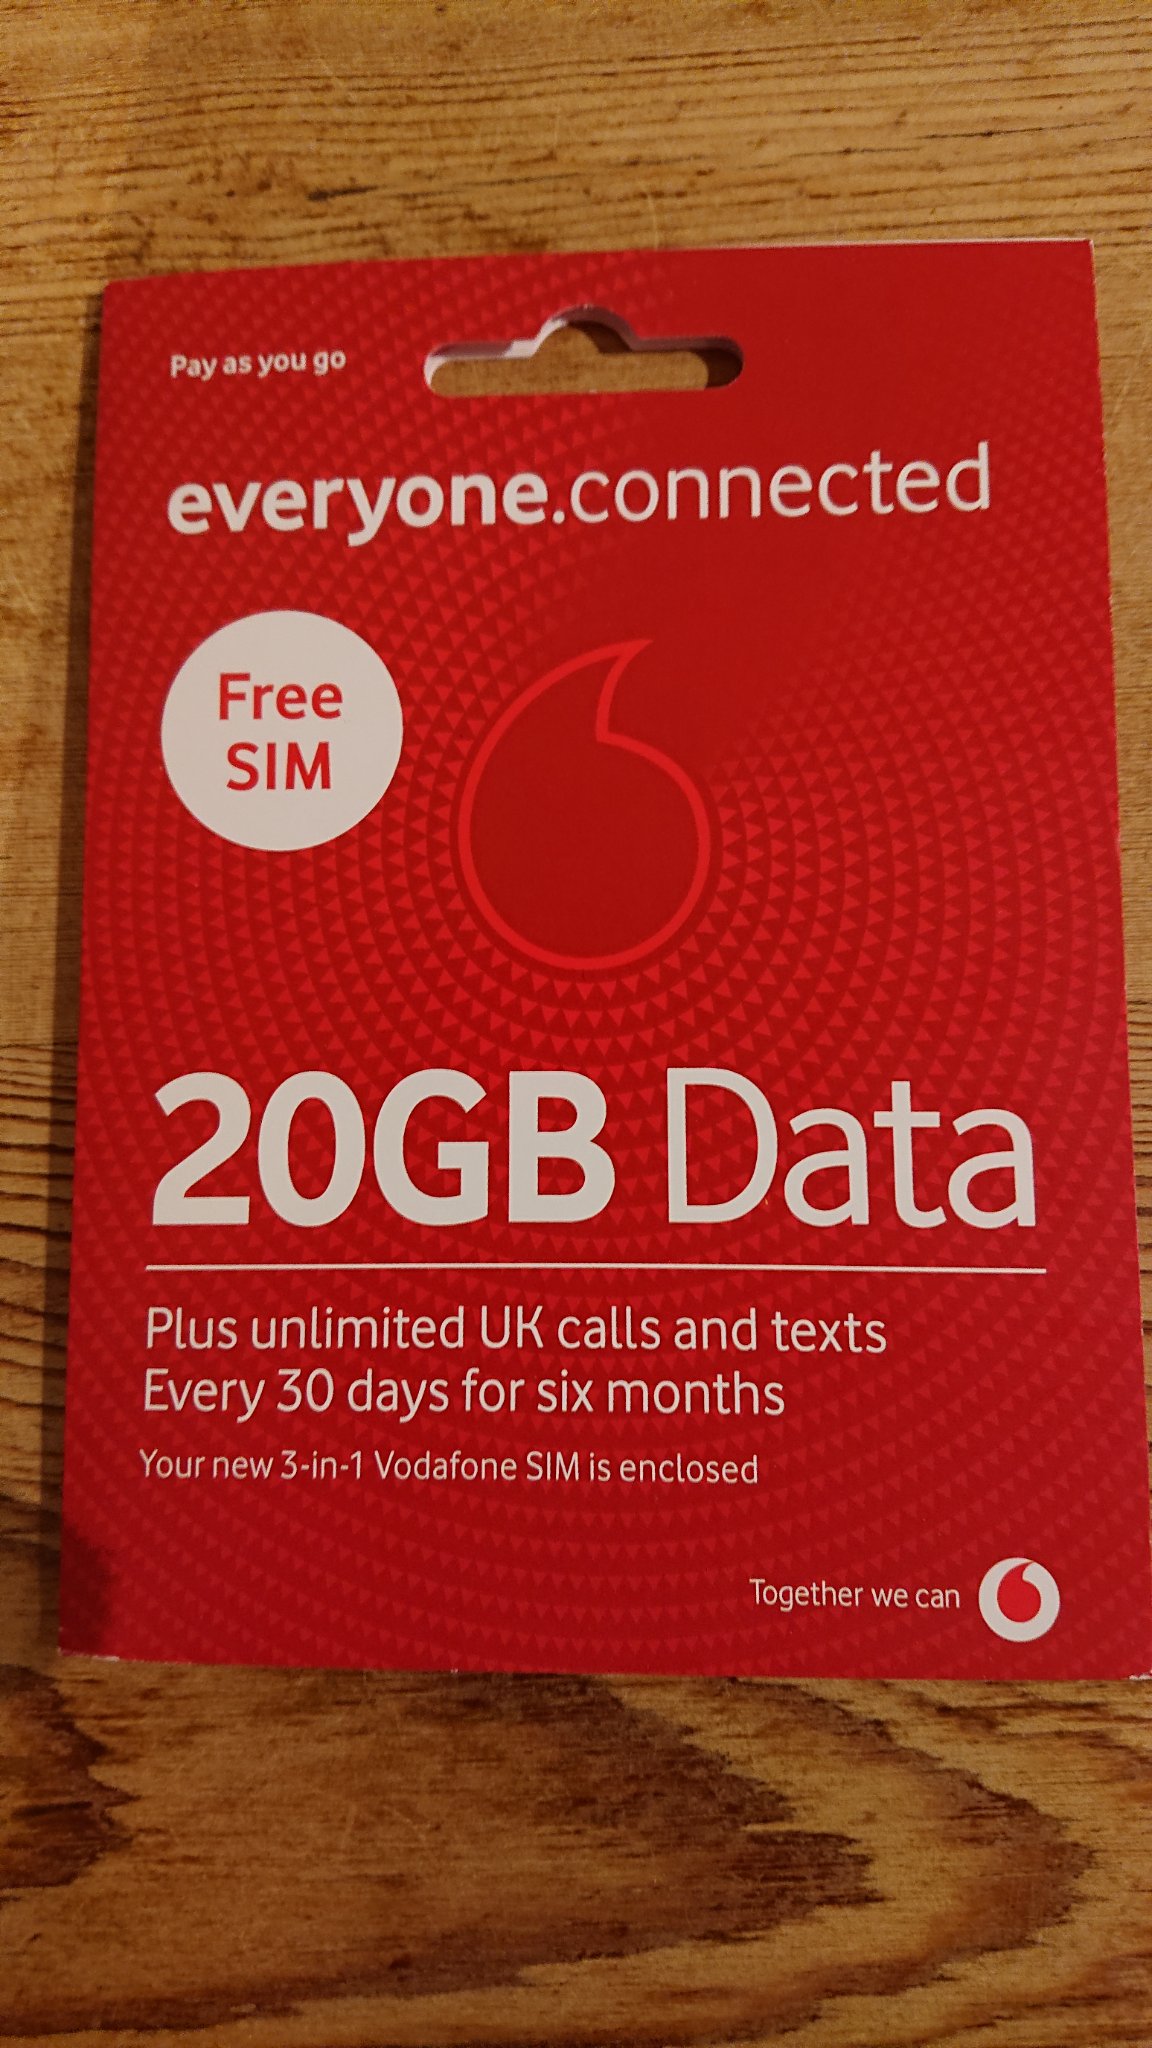 Rotary Club Amber Valley is donating Vodafone SIM cards to Ukrainian refugees